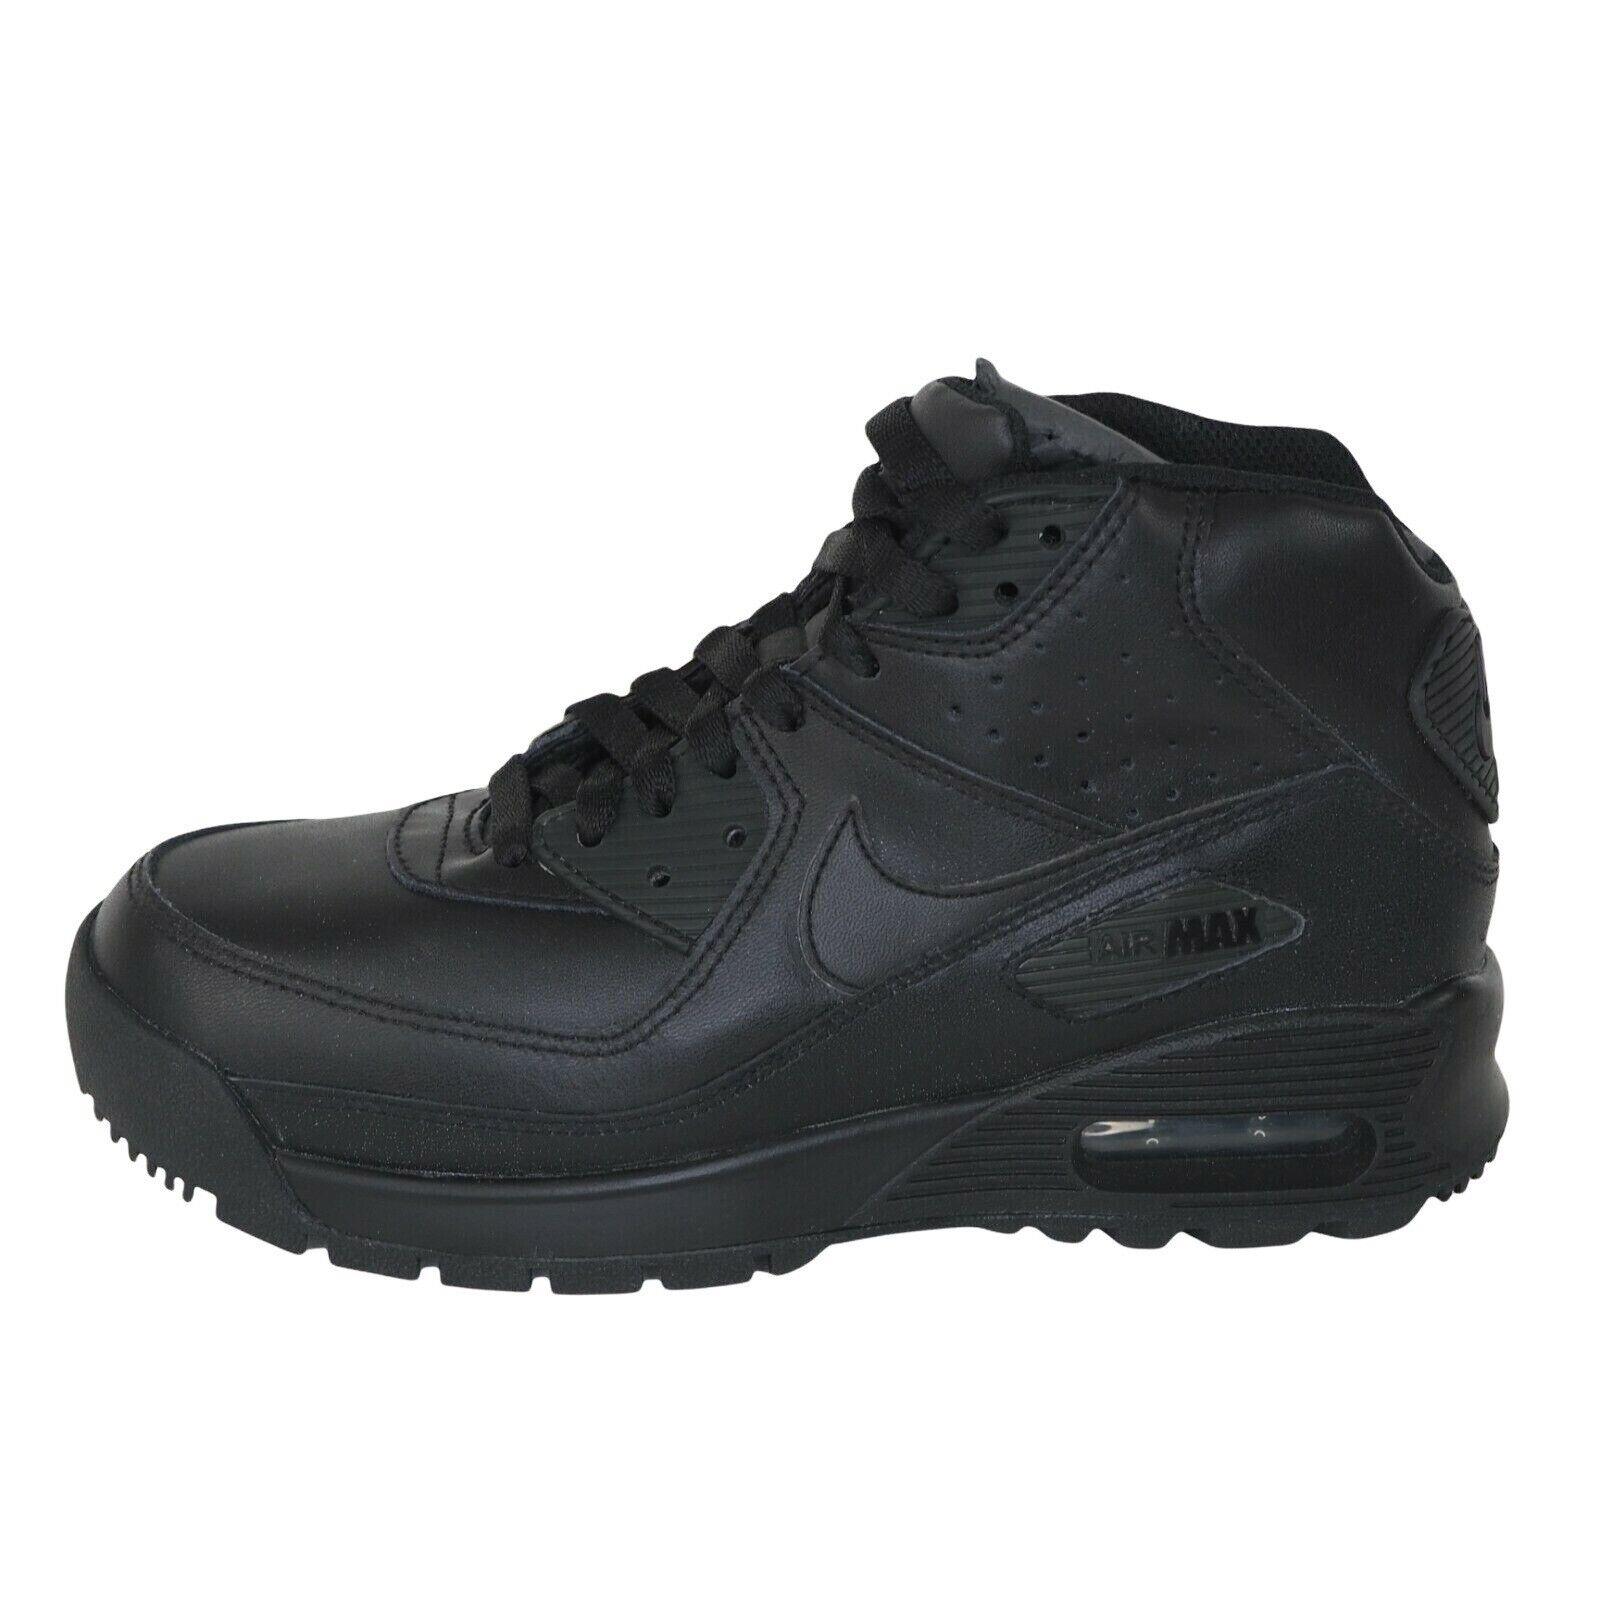 Nike Air Max 90 GS Boys 317219 004 Shoes Boot Casual Black Leather Size 5Y